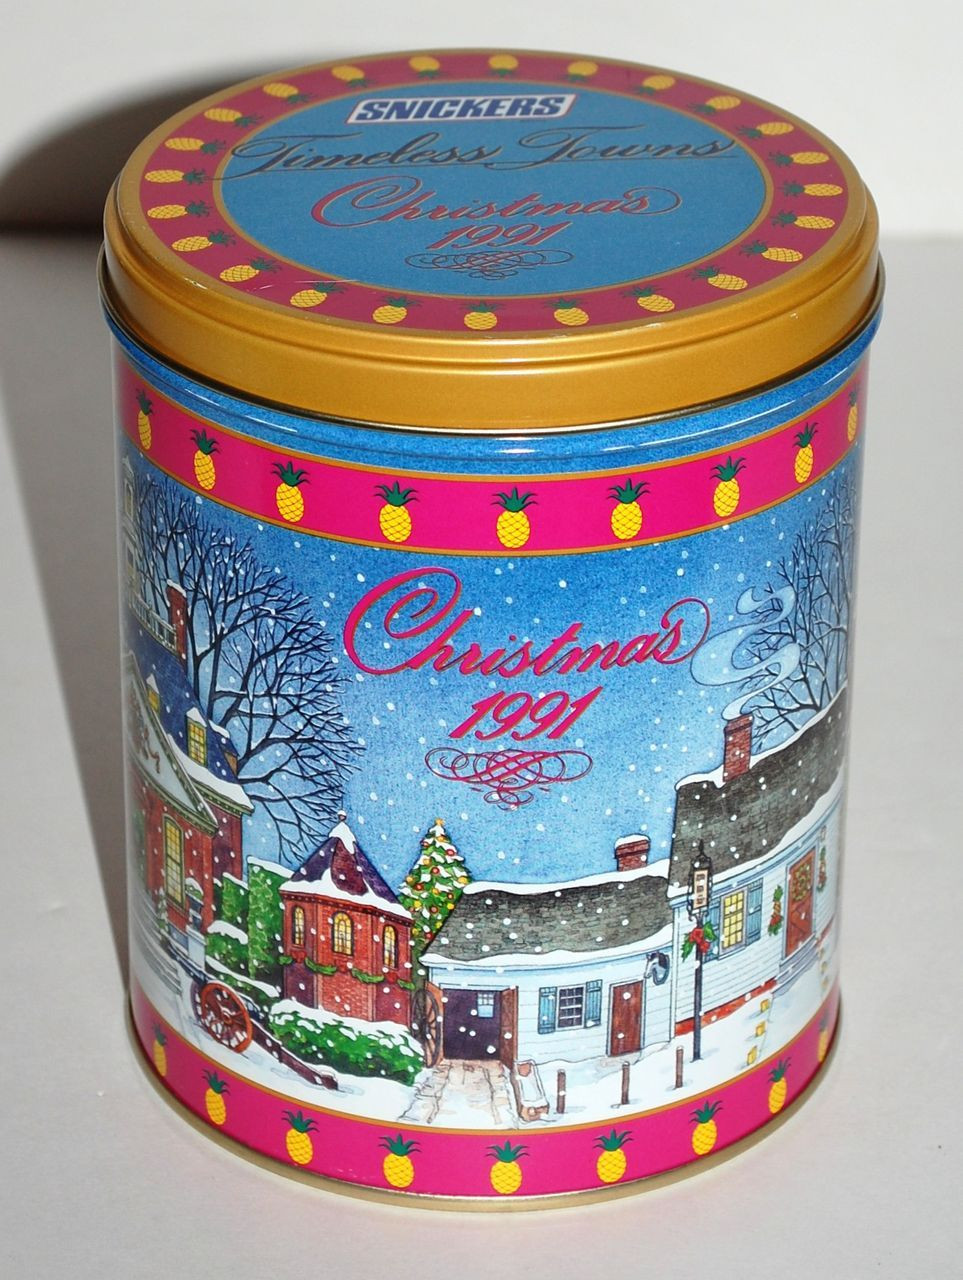 Christmas Candy Tins
 1991 Snickers Timeless Towns Christmas Candy Tin from